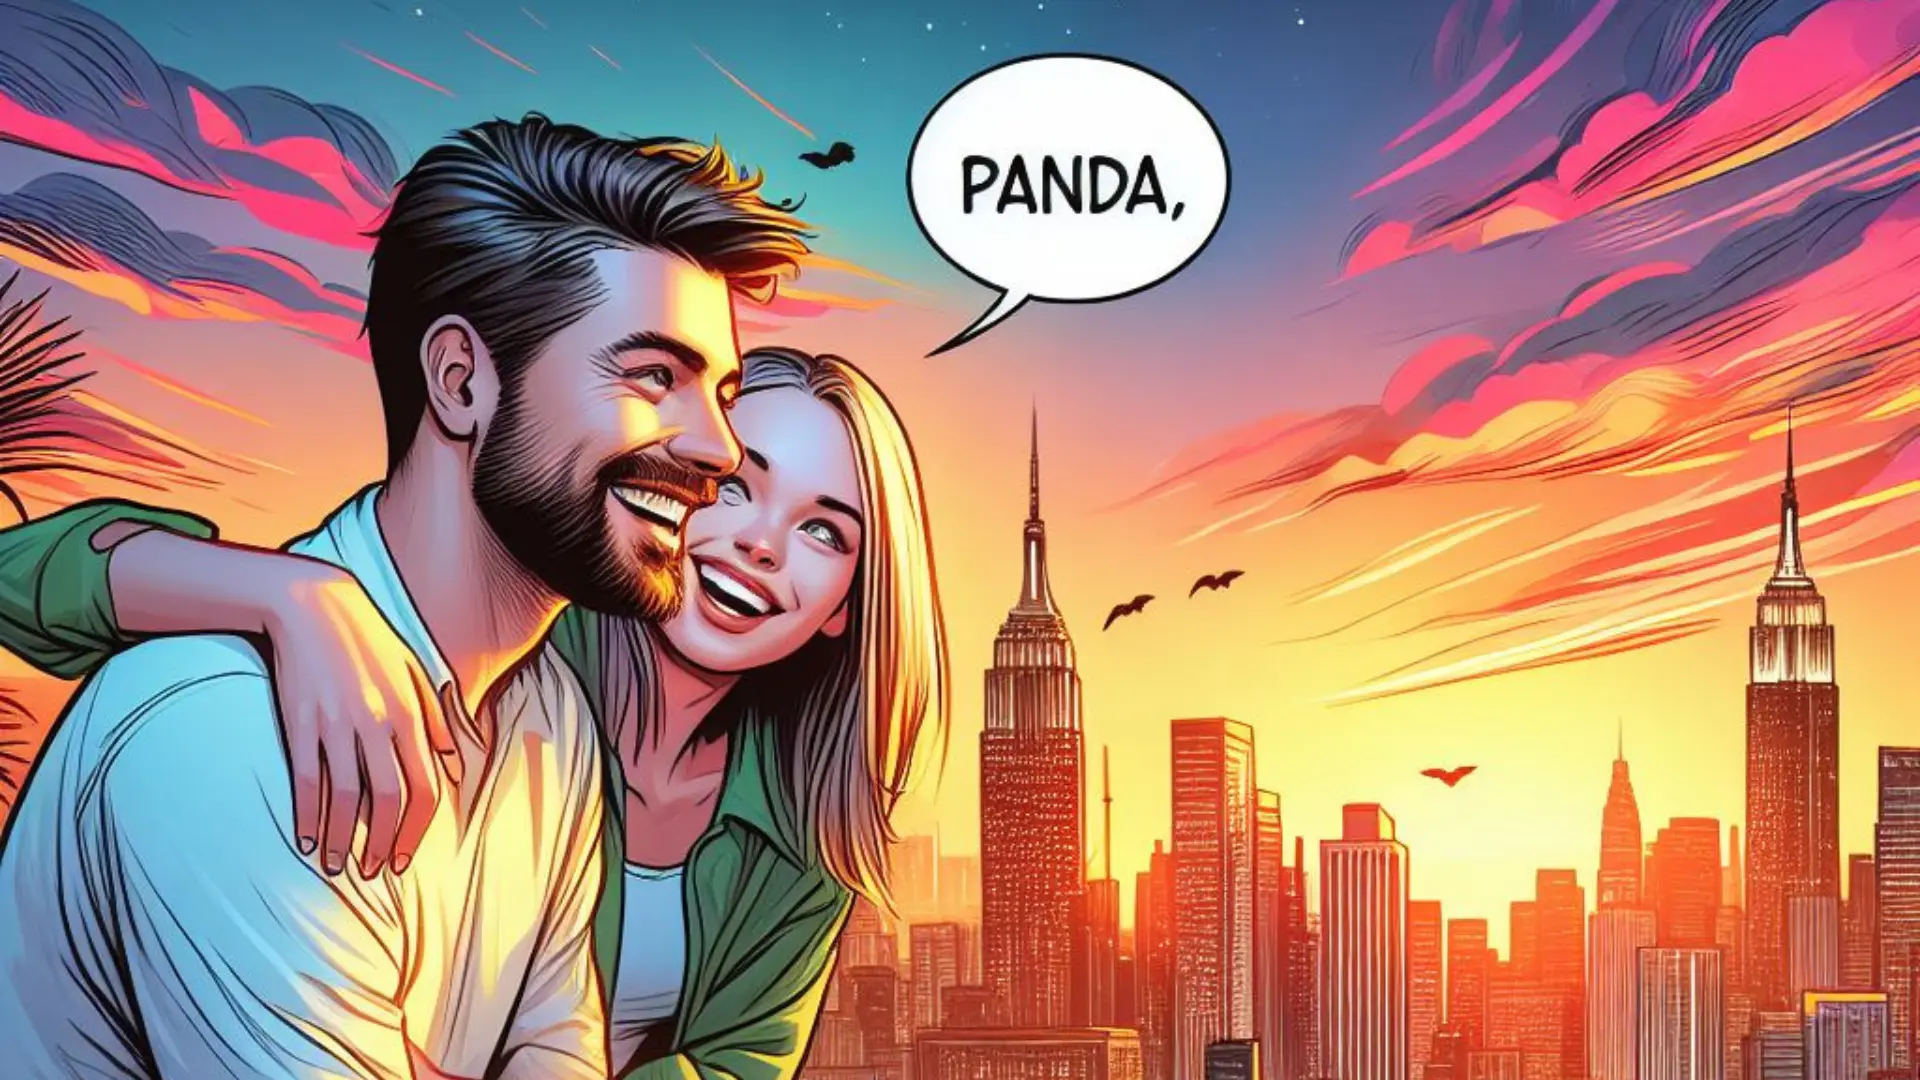 A joyful 30-year-old guy and a happy 25-year-old girl share a special sunset moment on a vibrant city rooftop. He smiles, calling her 'Panda.